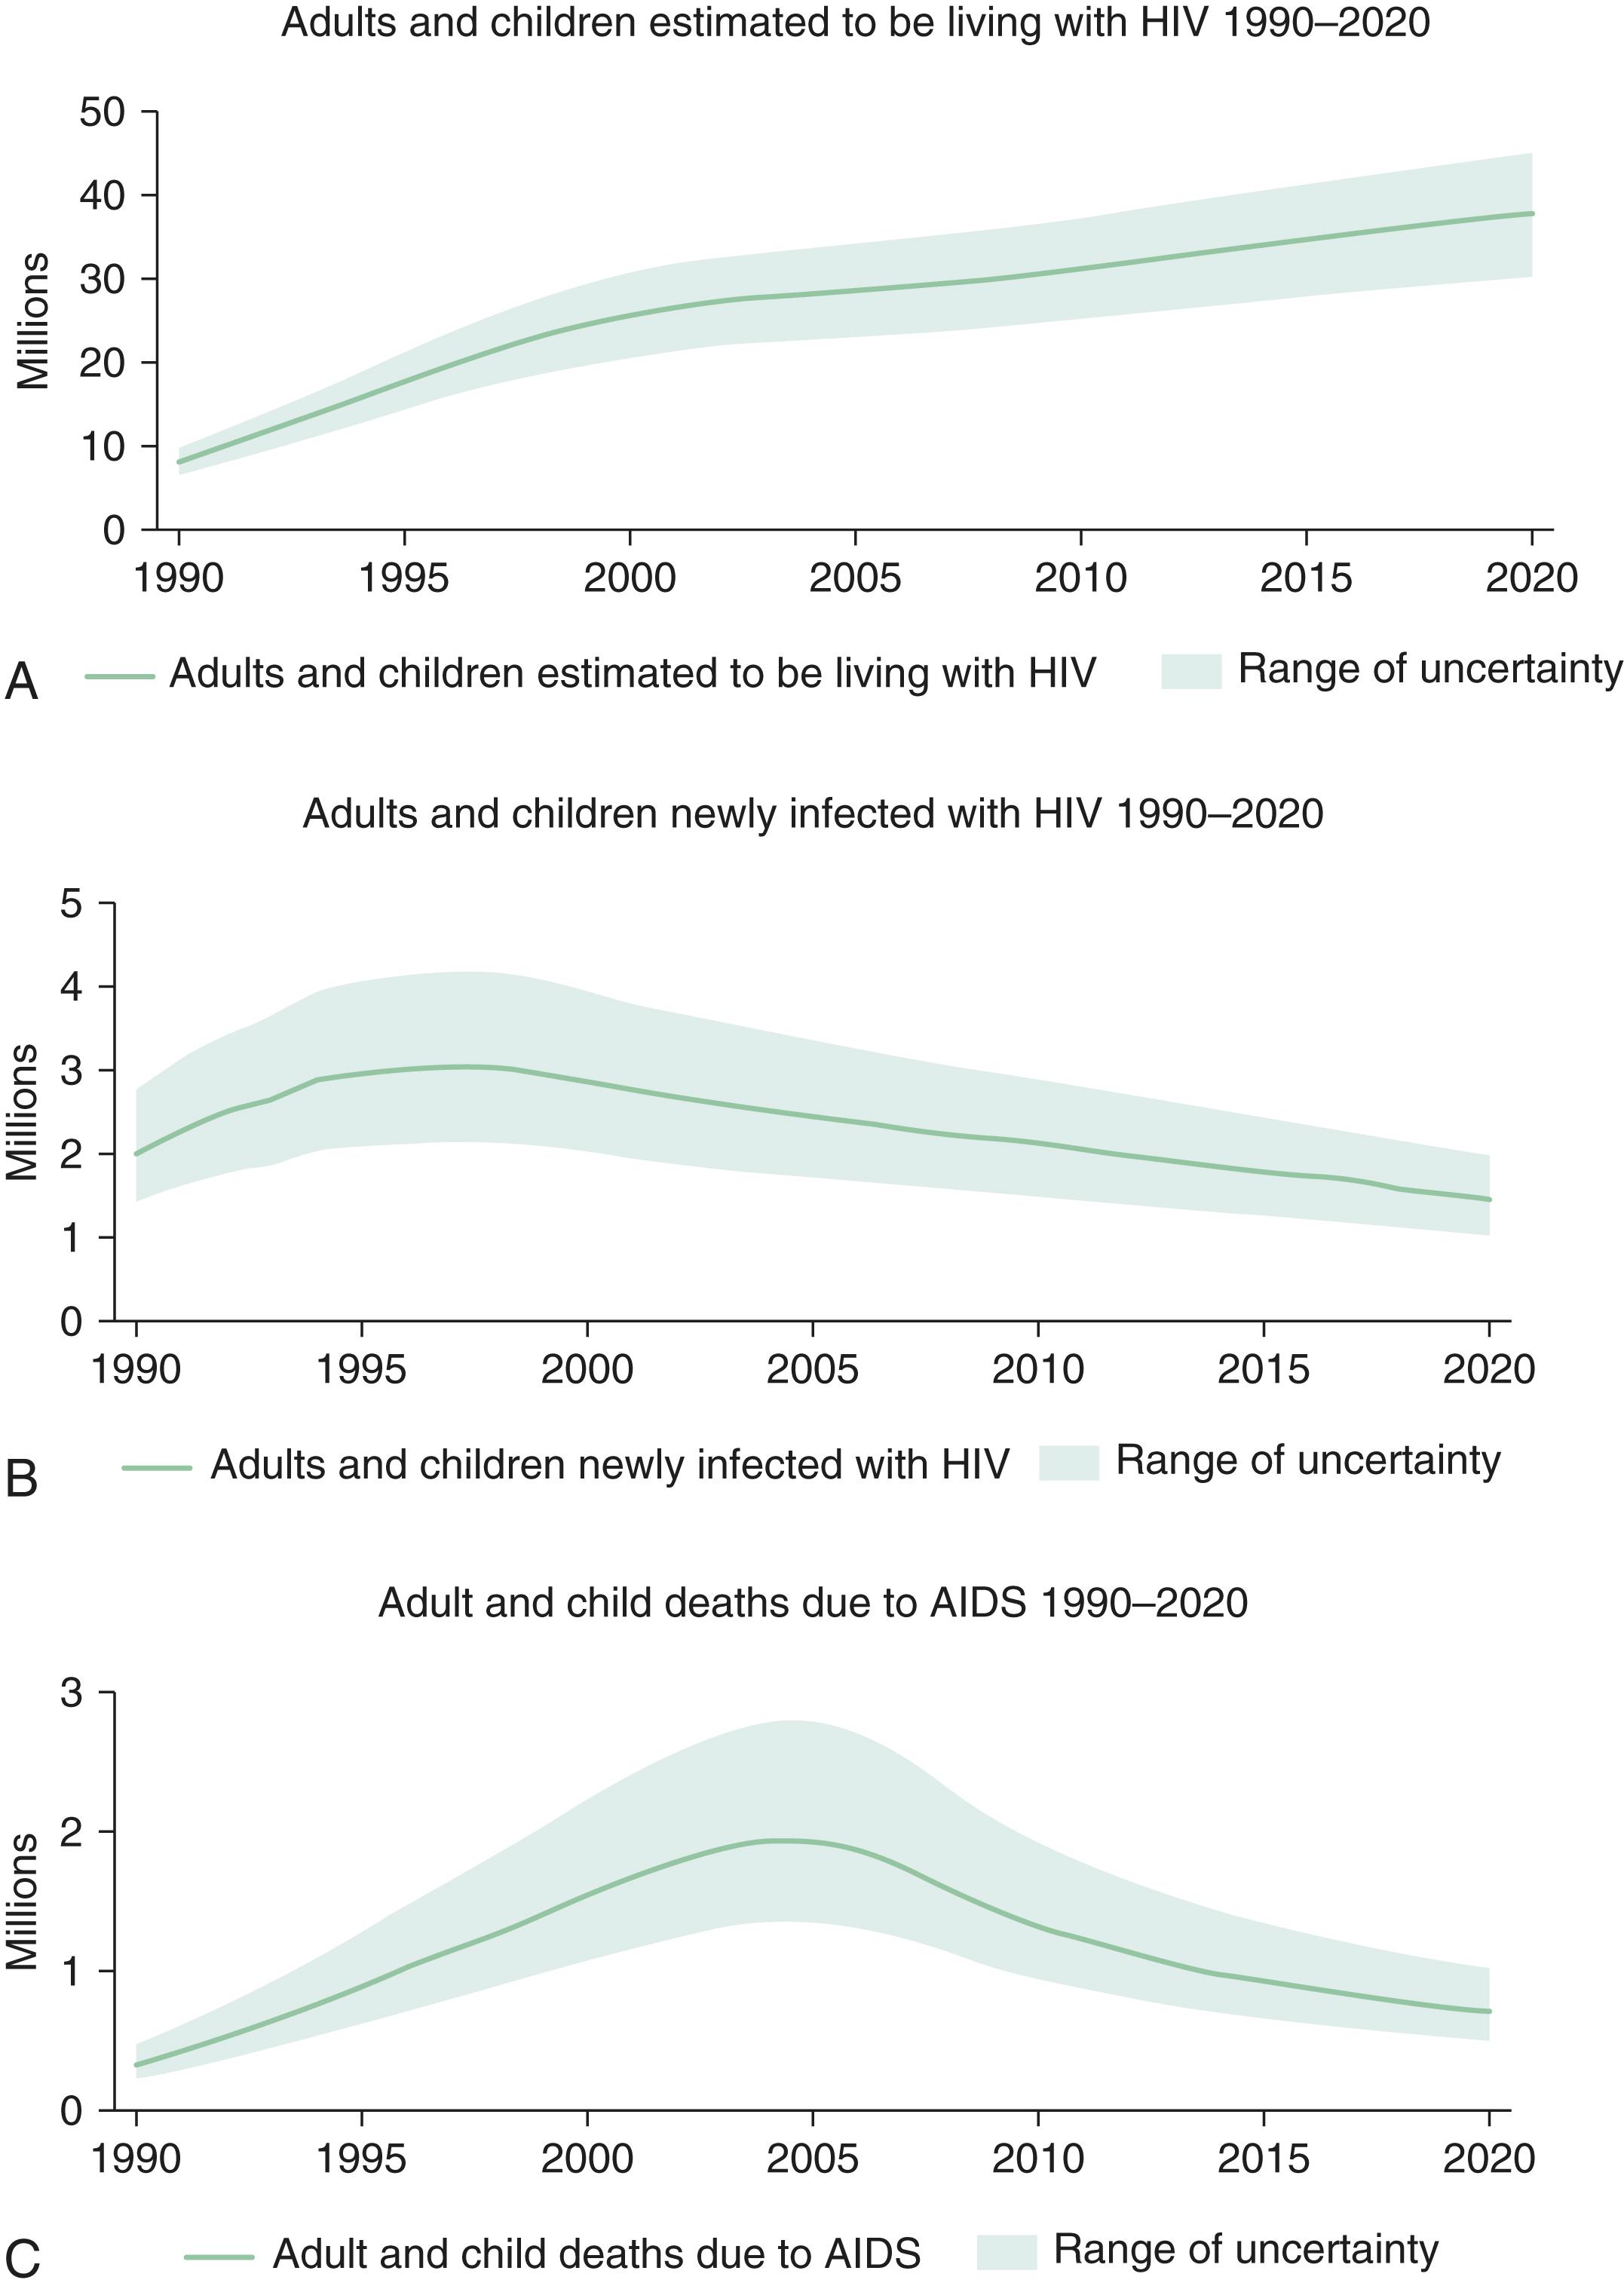 E-FIGURE 353-1, A total of 37.7 million people were living with HIV infection by the end of 2020.